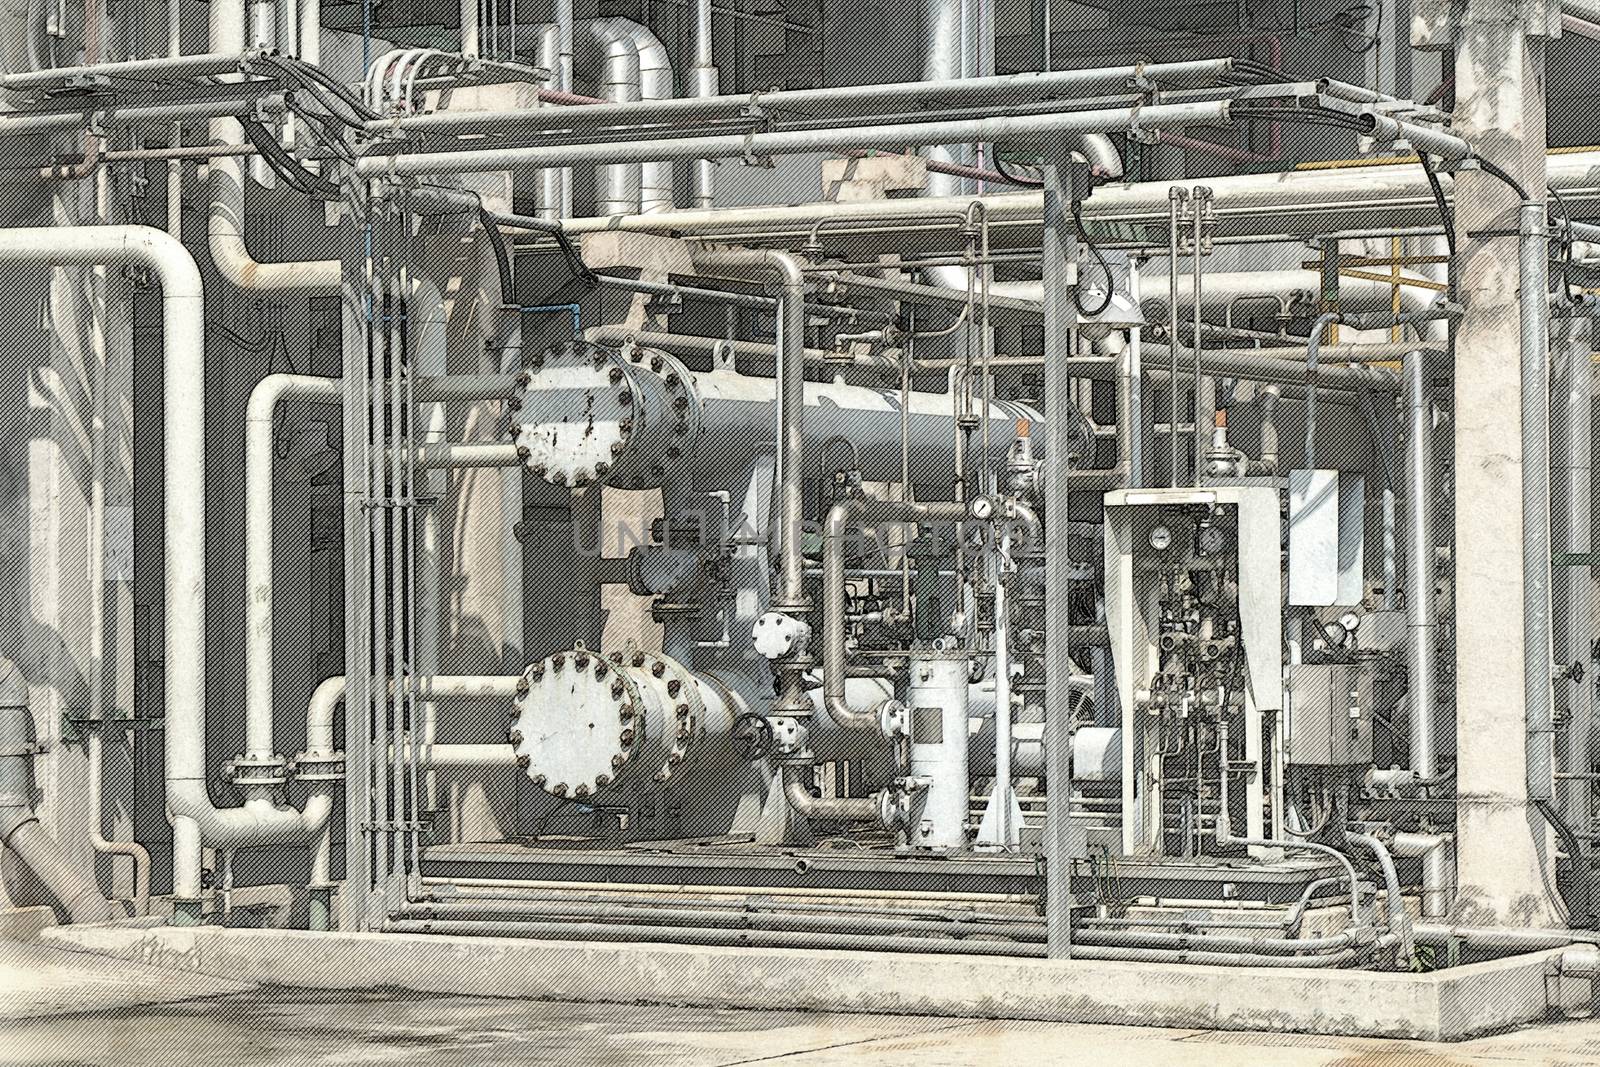 Sketch of the pipe in the Refinery industry by pkproject